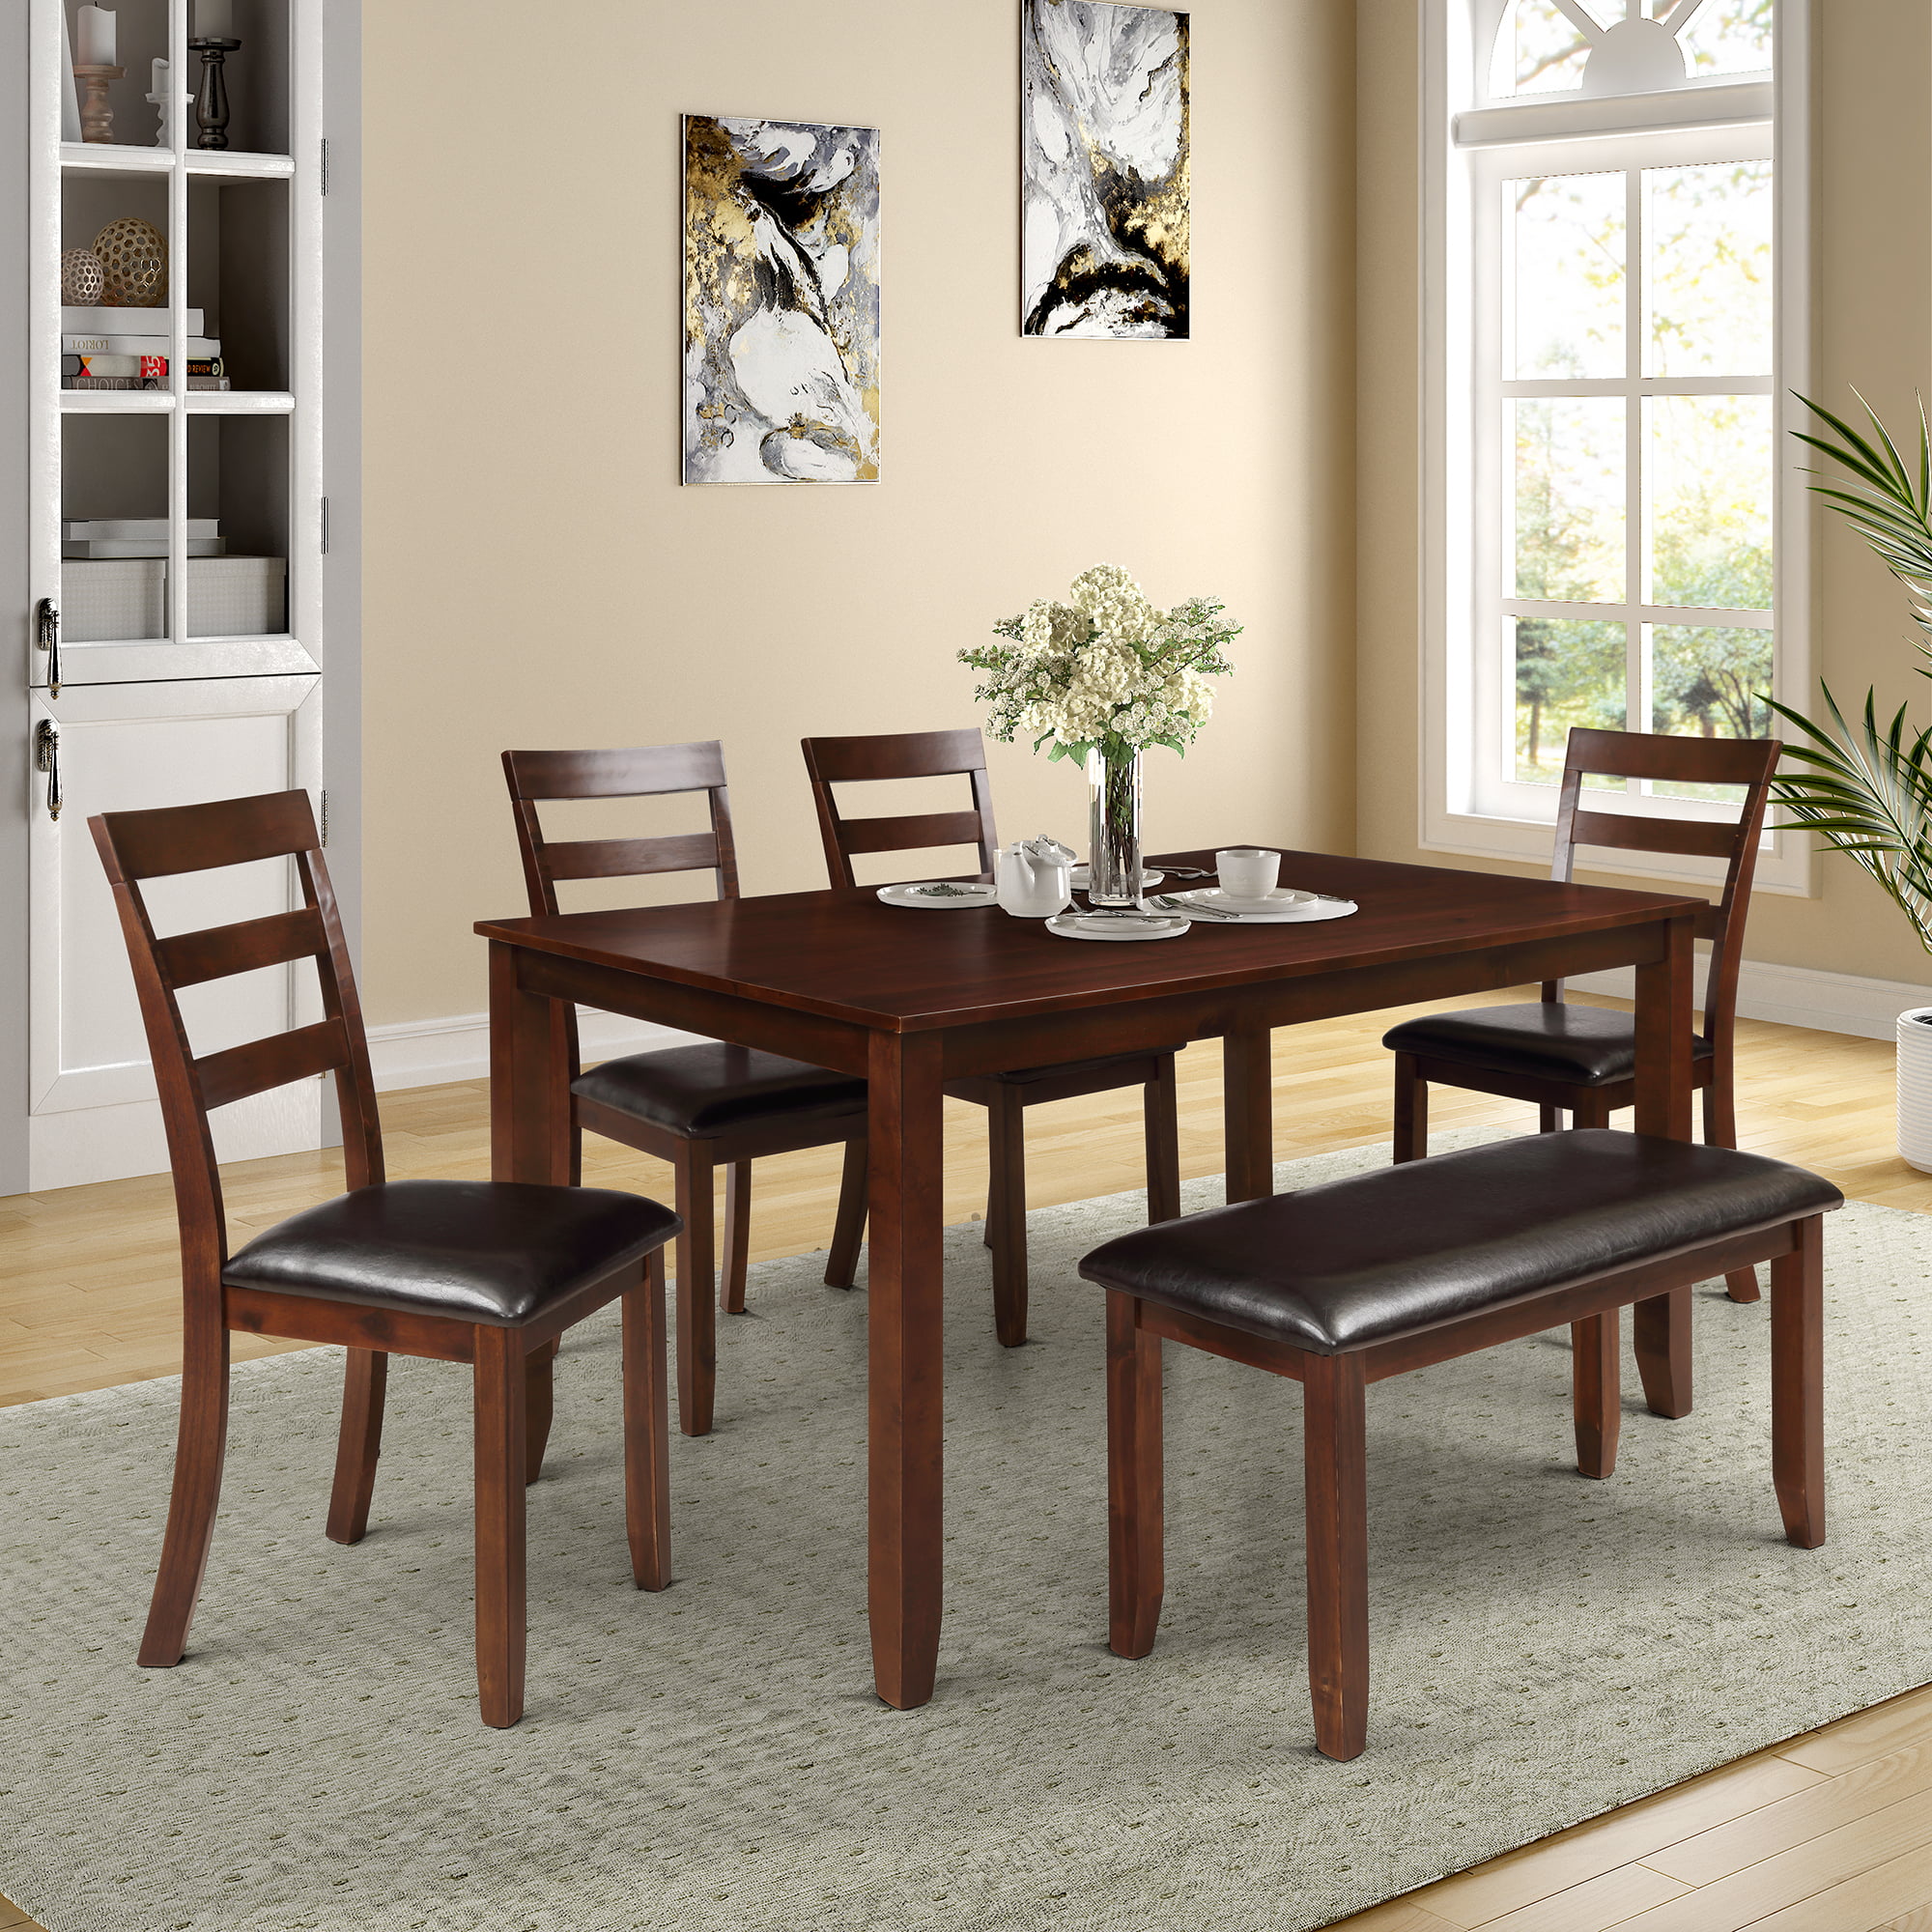 Dining Table Sets Clearance, 6 Piece Wood Breakfast Table with 4 Piece